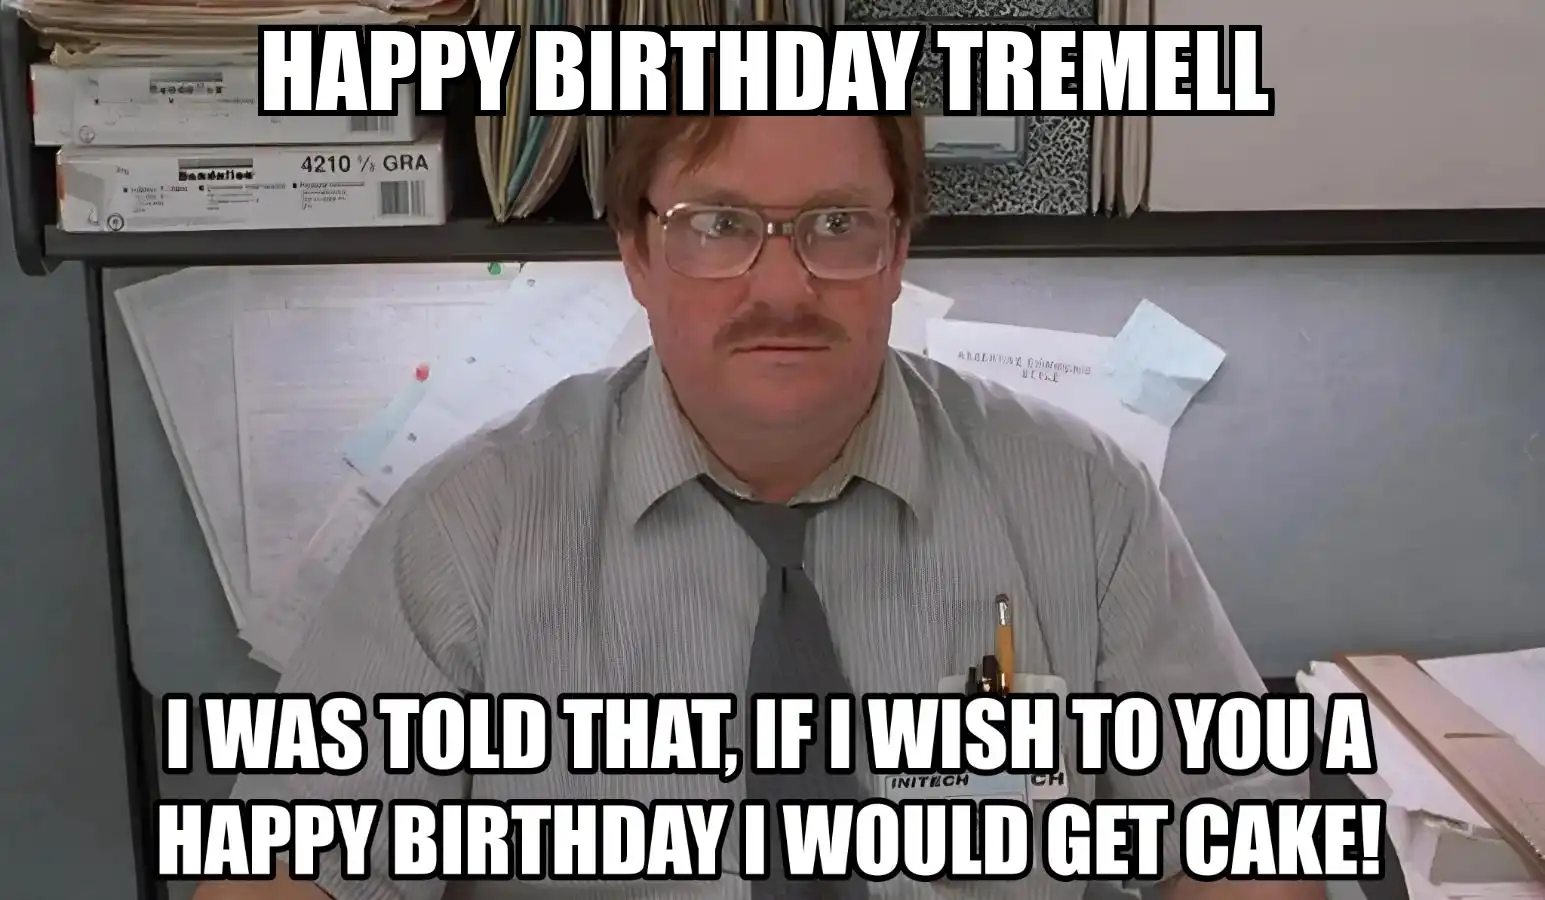 Happy Birthday Tremell I Would Get A Cake Meme